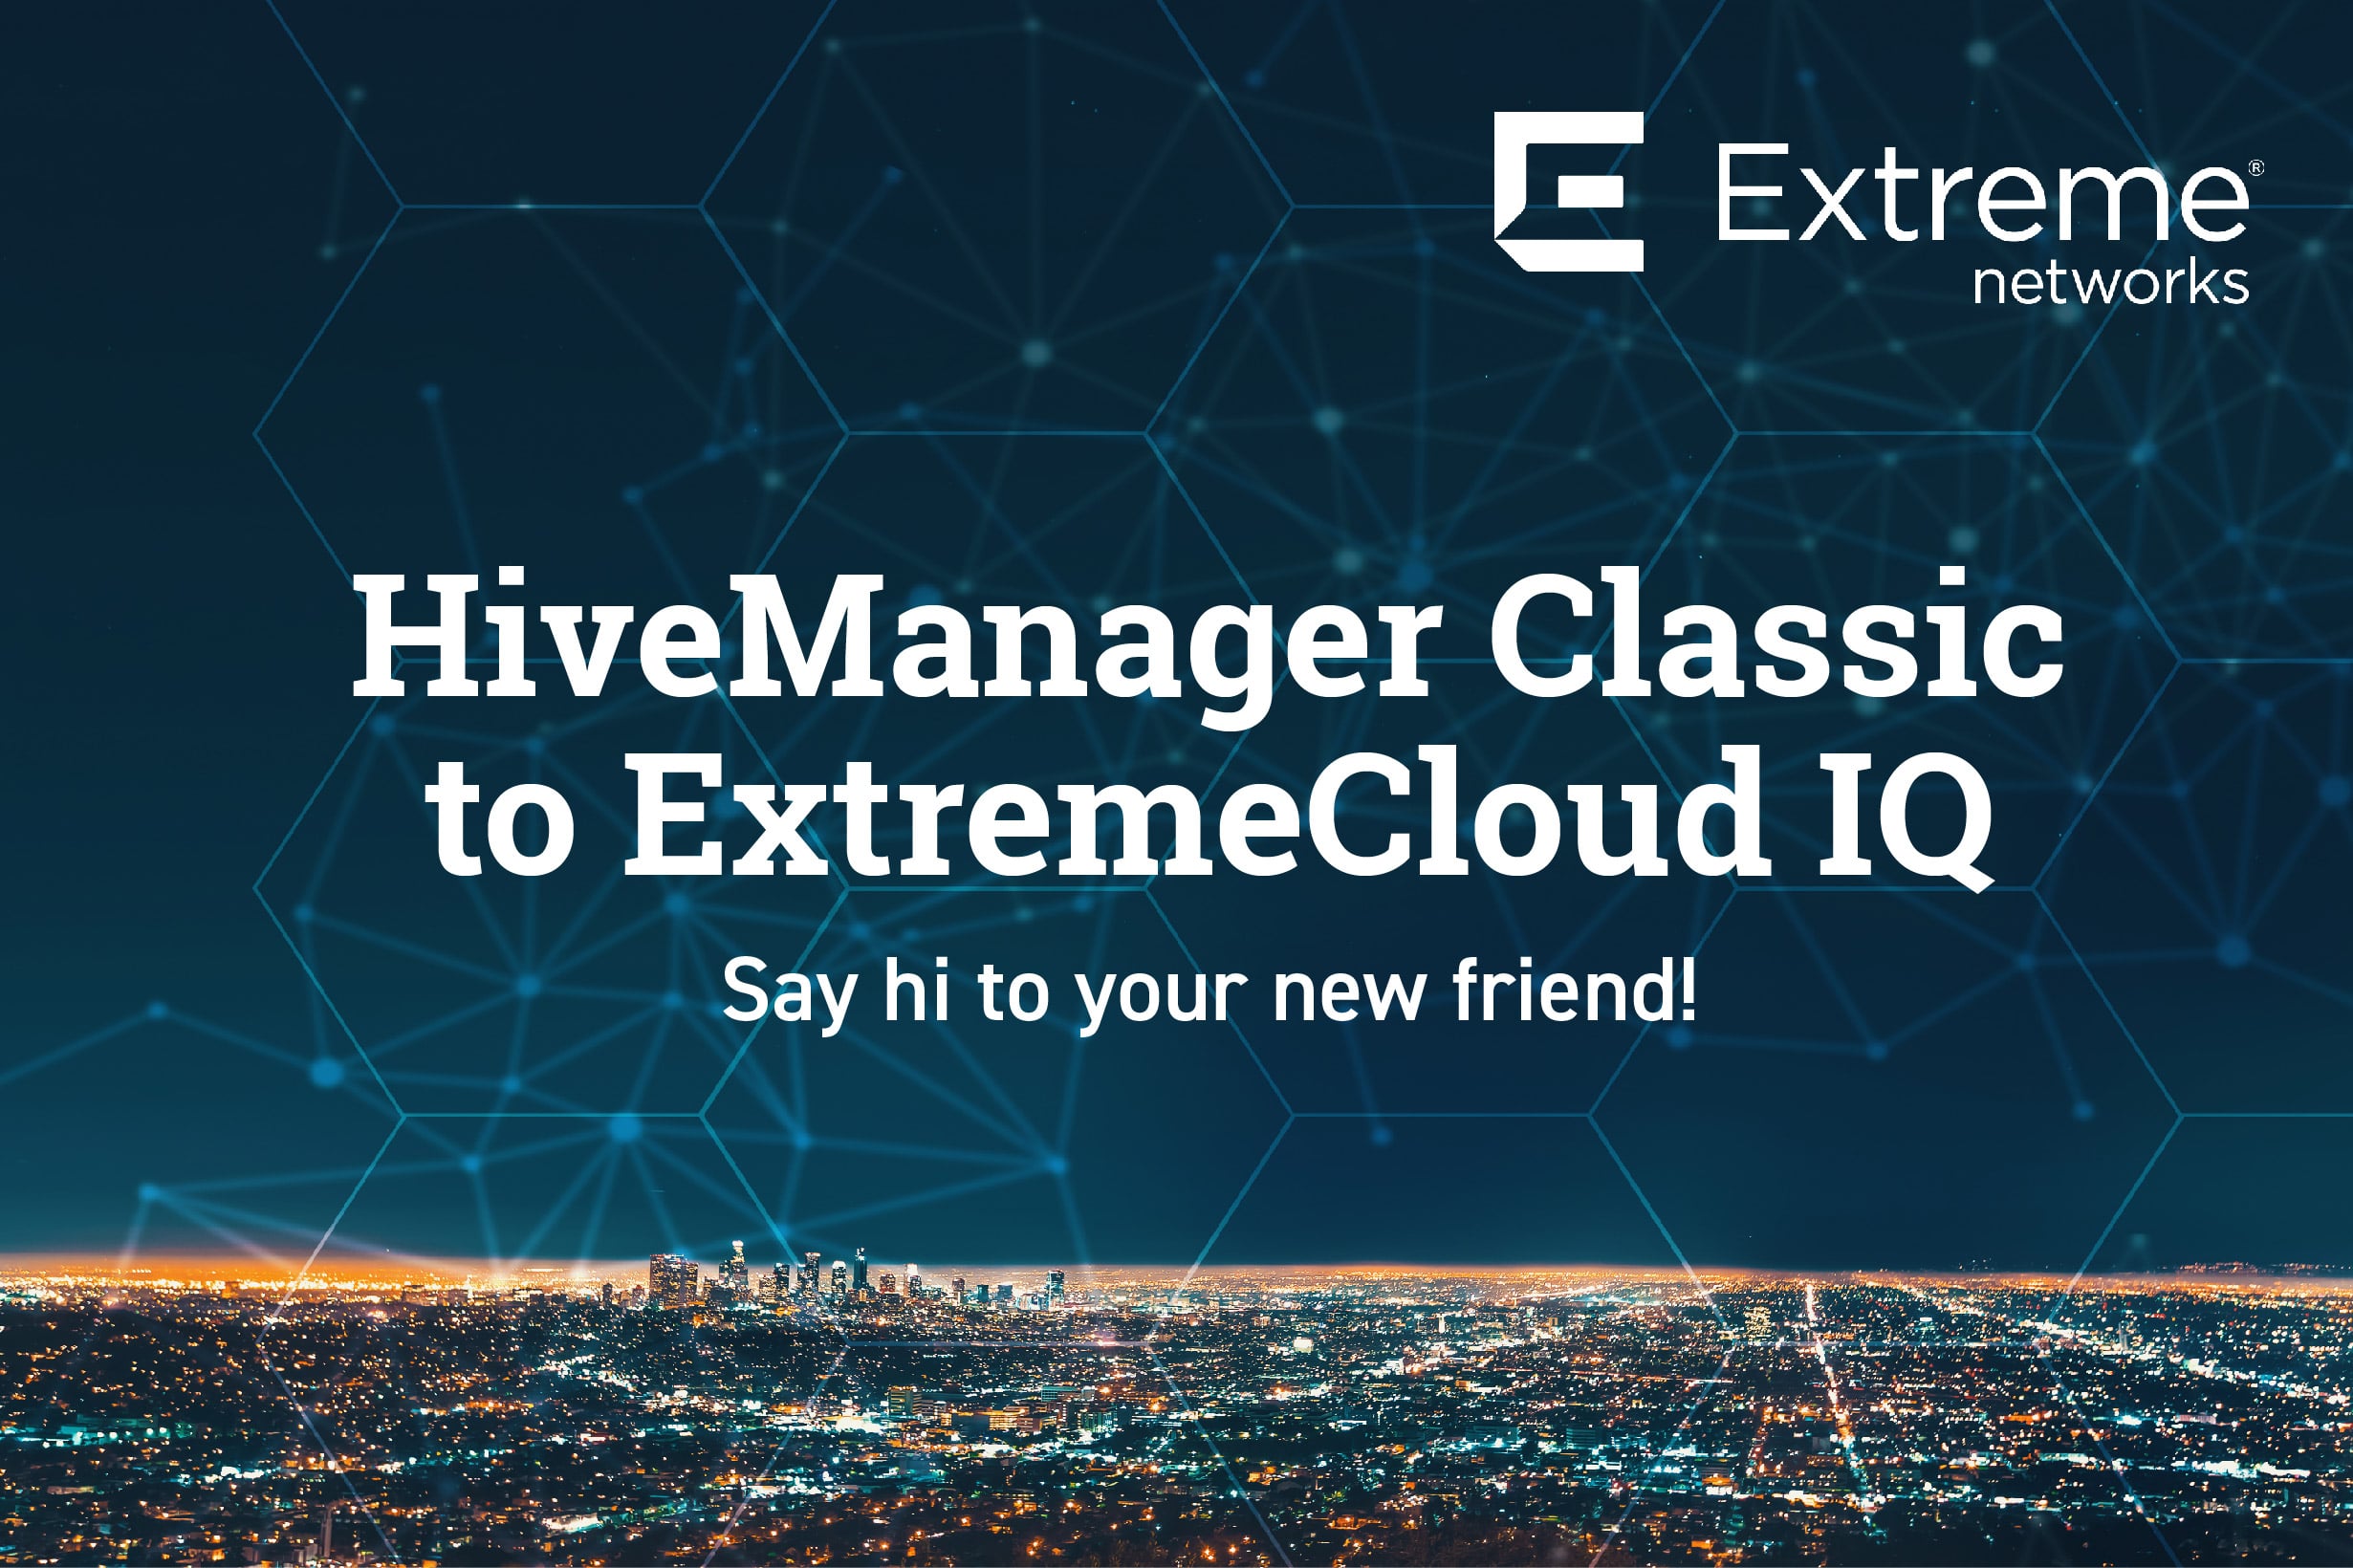 extreme networks - extremecloud IQ